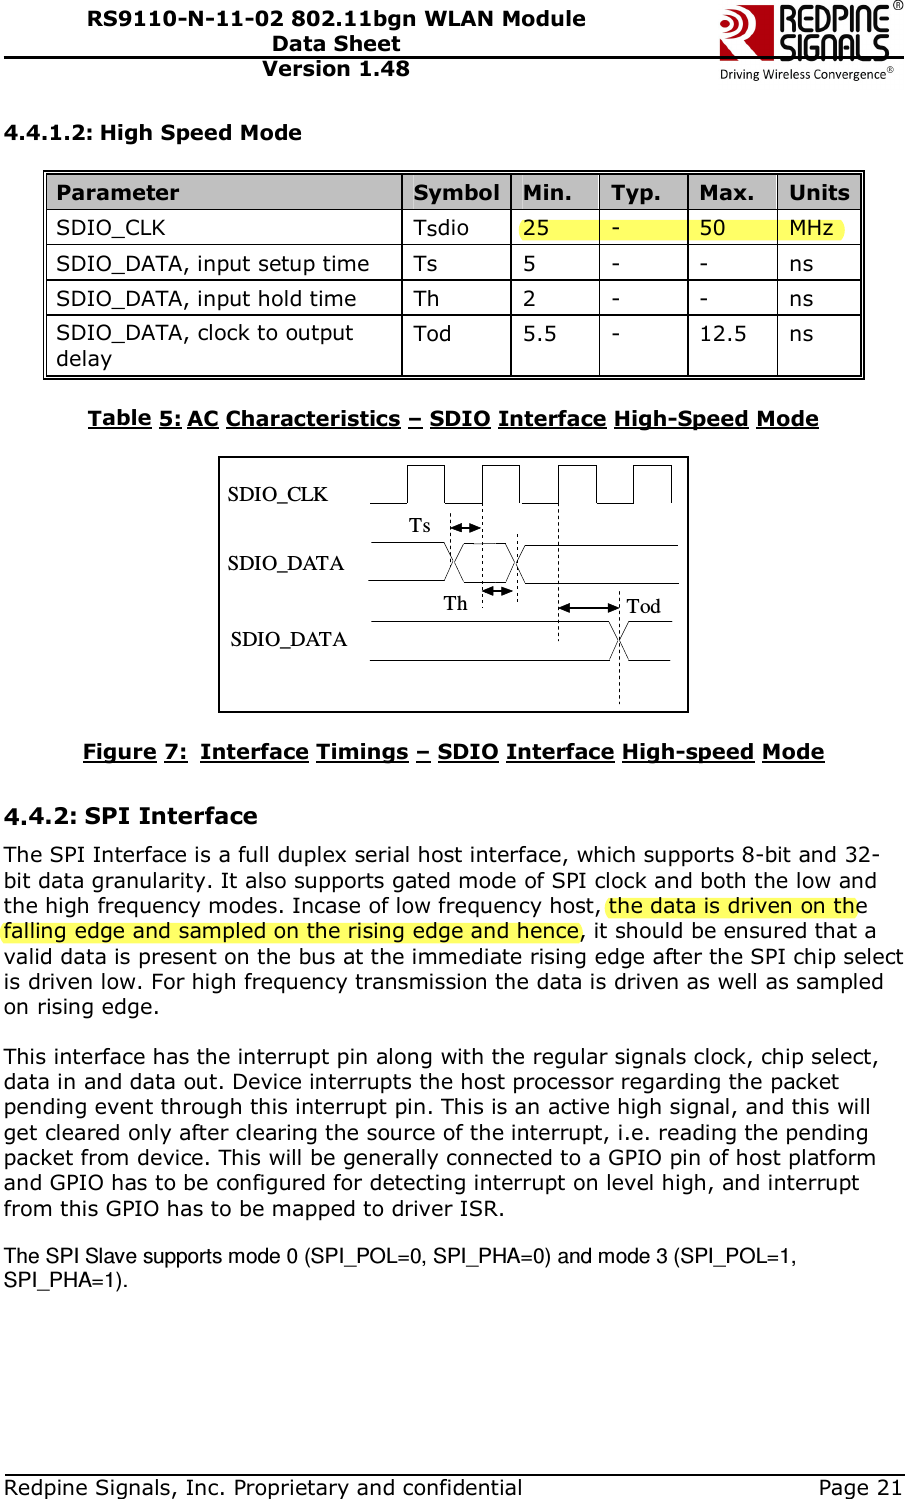   Redpine Signals, Inc. Proprietary and confidential  Page 21 RS9110-N-11-02 802.11bgn WLAN Module Data Sheet Version 1.48 4.4.1.2: High Speed Mode                             Parameter  Symbol Min.  Typ.  Max.  Units SDIO_CLK   Tsdio  25  -  50  MHz SDIO_DATA, input setup time   Ts  5  -  -  ns SDIO_DATA, input hold time  Th  2  -  -  ns SDIO_DATA, clock to output delay Tod  5.5  -  12.5  ns     Table 5: AC Characteristics – SDIO Interface High-Speed Mode  SDIO_CLKSDIO_DATASDIO_DATATodThTs  Figure 7:  Interface Timings – SDIO Interface High-speed Mode  4.4.2: SPI Interface The SPI Interface is a full duplex serial host interface, which supports 8-bit and 32-bit data granularity. It also supports gated mode of SPI clock and both the low and the high frequency modes. Incase of low frequency host, the data is driven on the falling edge and sampled on the rising edge and hence, it should be ensured that a valid data is present on the bus at the immediate rising edge after the SPI chip select is driven low. For high frequency transmission the data is driven as well as sampled on rising edge.  This interface has the interrupt pin along with the regular signals clock, chip select, data in and data out. Device interrupts the host processor regarding the packet pending event through this interrupt pin. This is an active high signal, and this will get cleared only after clearing the source of the interrupt, i.e. reading the pending packet from device. This will be generally connected to a GPIO pin of host platform and GPIO has to be configured for detecting interrupt on level high, and interrupt from this GPIO has to be mapped to driver ISR.  The SPI Slave supports mode 0 (SPI_POL=0, SPI_PHA=0) and mode 3 (SPI_POL=1, SPI_PHA=1).  